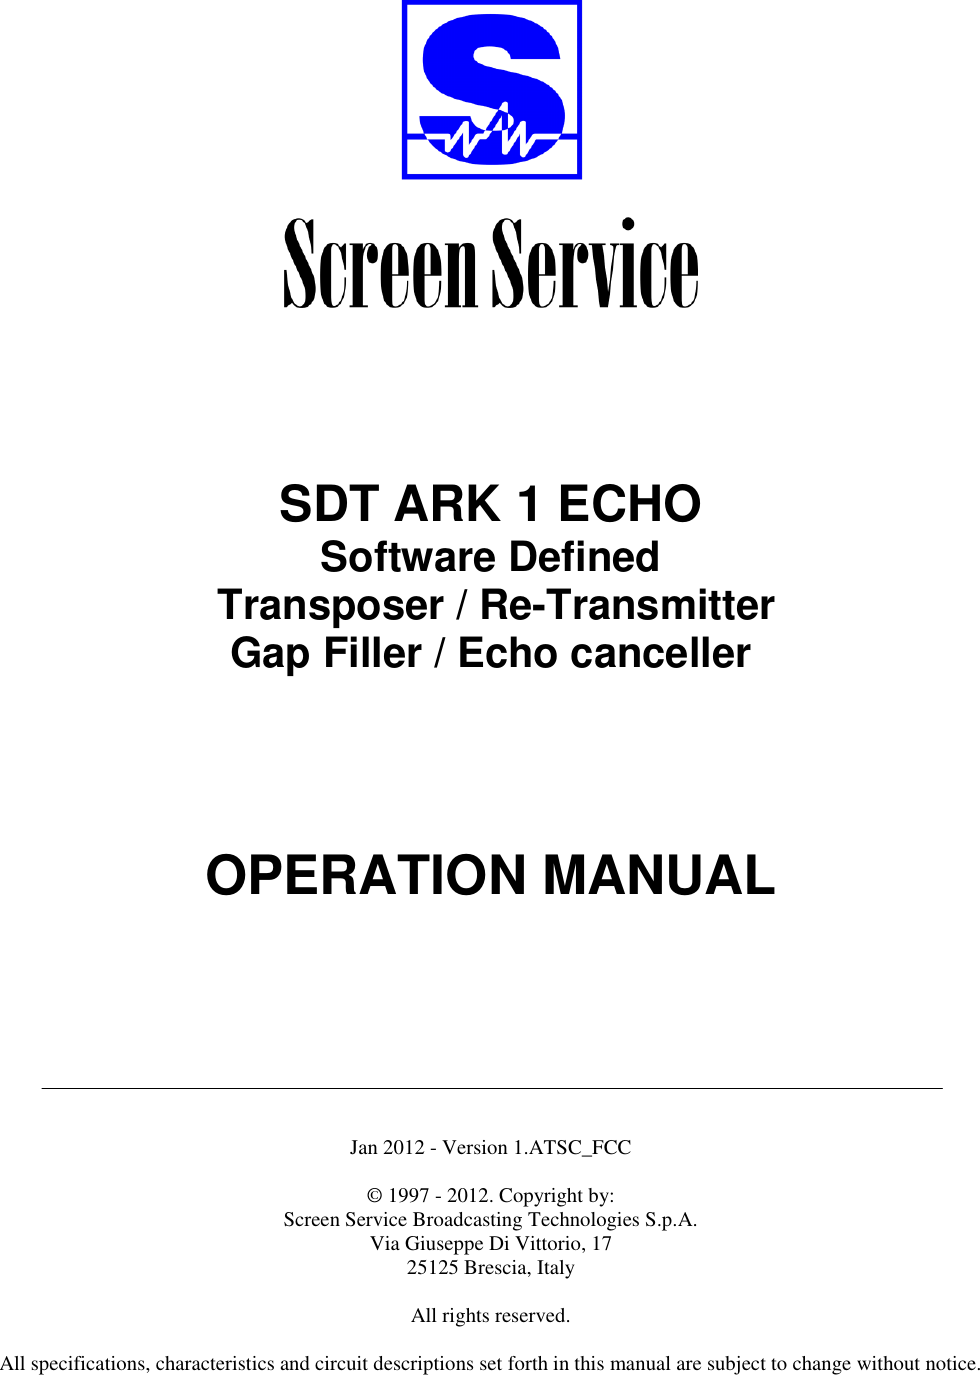          SDT ARK 1 ECHO Software Defined  Transposer / Re-Transmitter Gap Filler / Echo canceller        OPERATION MANUAL         Jan 2012 - Version 1.ATSC_FCC  © 1997 - 2012. Copyright by:  Screen Service Broadcasting Technologies S.p.A. Via Giuseppe Di Vittorio, 17 25125 Brescia, Italy  All rights reserved.  All specifications, characteristics and circuit descriptions set forth in this manual are subject to change without notice.  